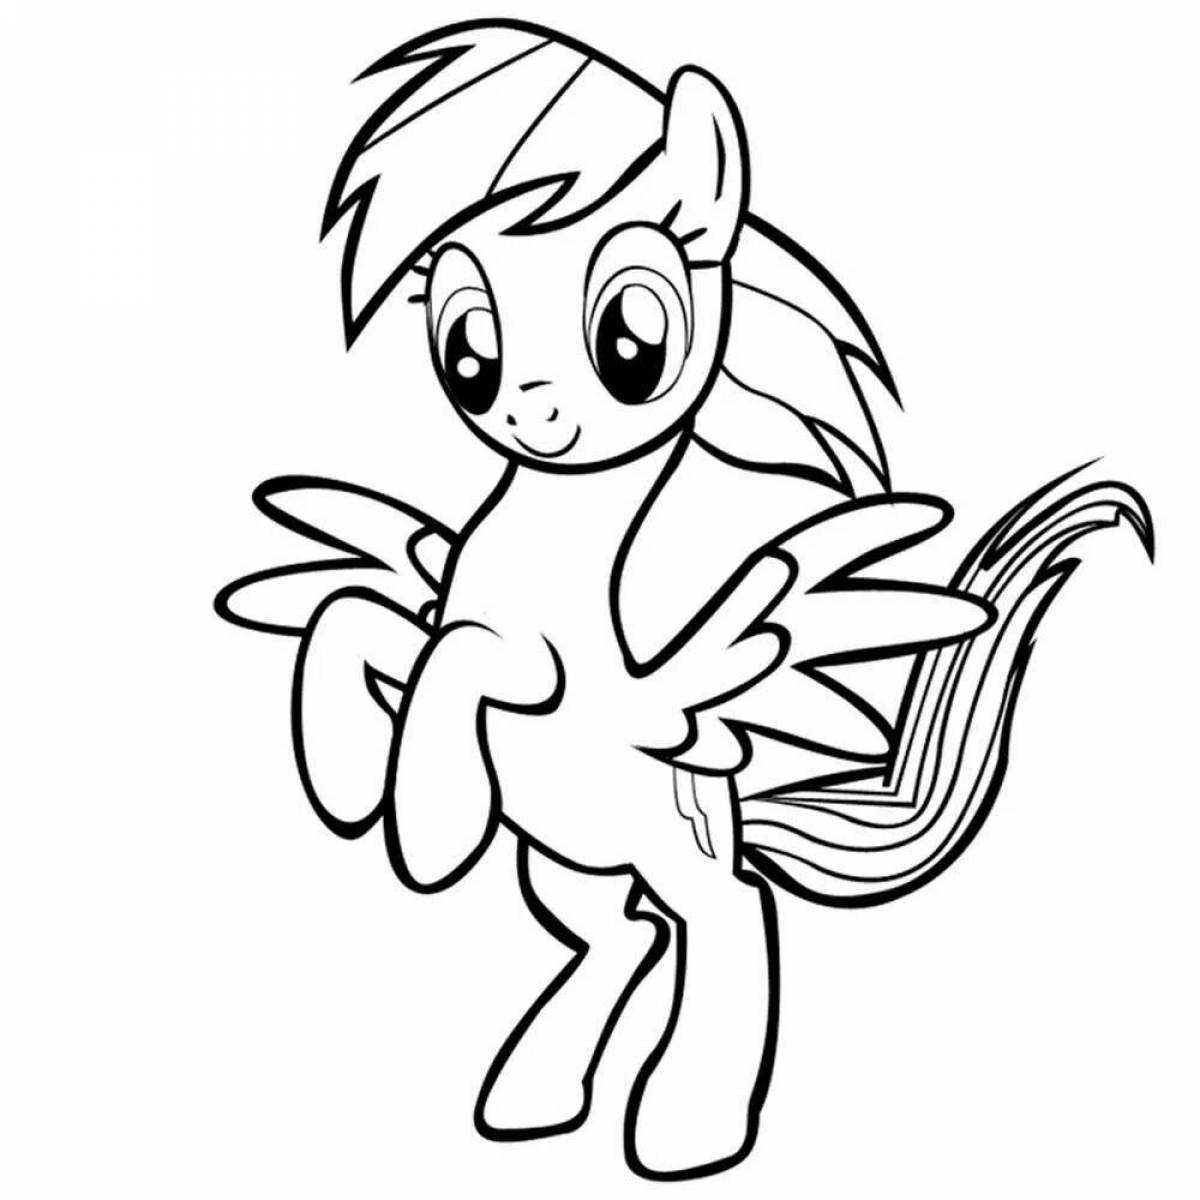 Lovely rambul dash coloring page